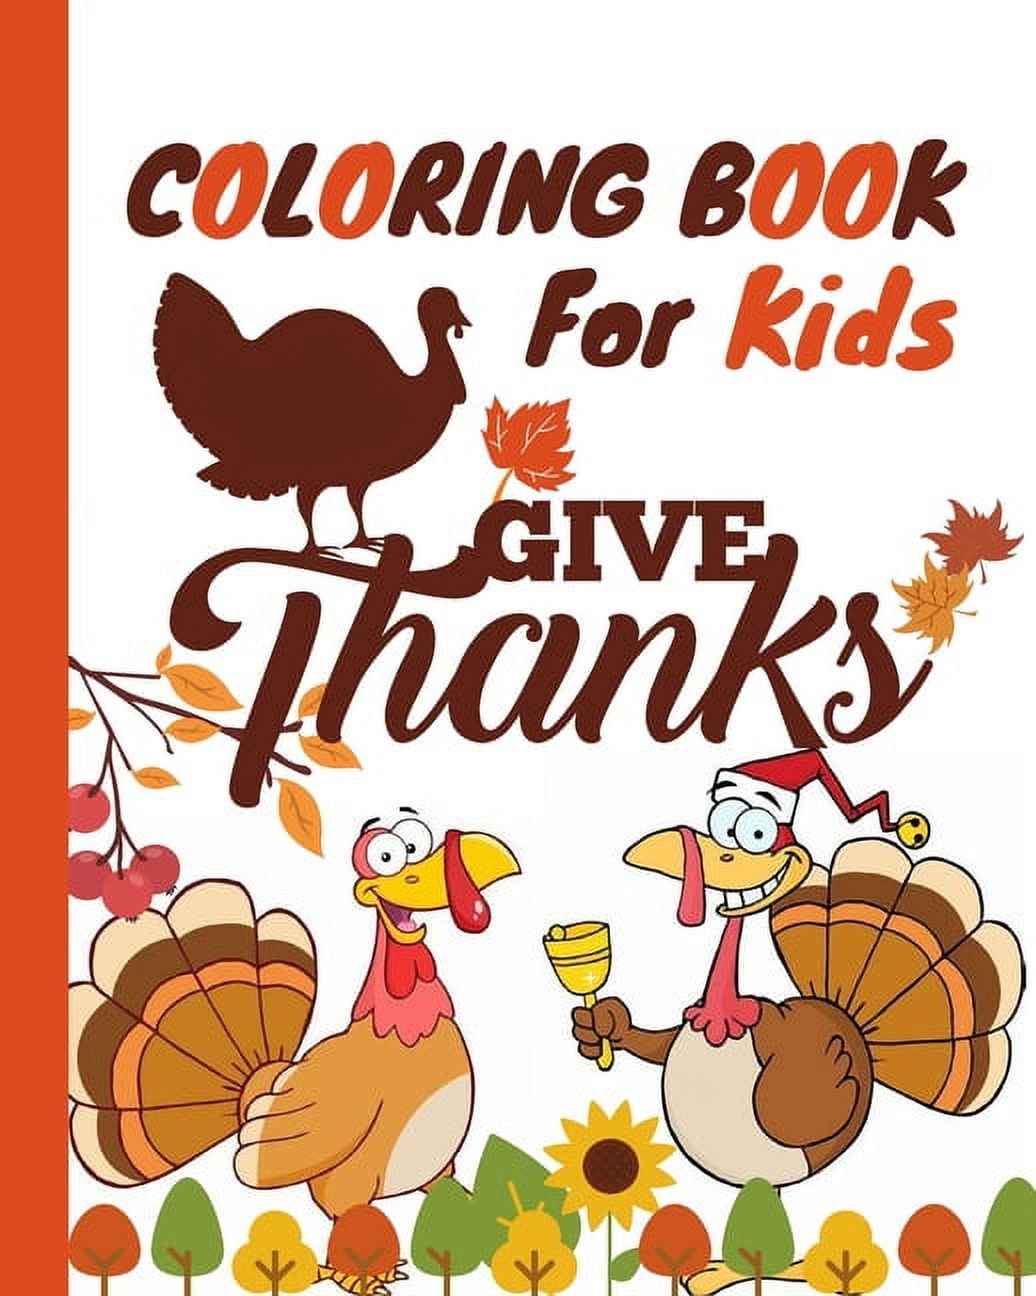 for　Fun　Kids　For　Coloring　4-8　Thanksgiving　Kids　for　Kids　and　Collection　Pages　Coloring　(Other)　and　Book　Cute　Thanks:　Fun　Book　50　of　Give　Ages　Thanksgiving　Easy